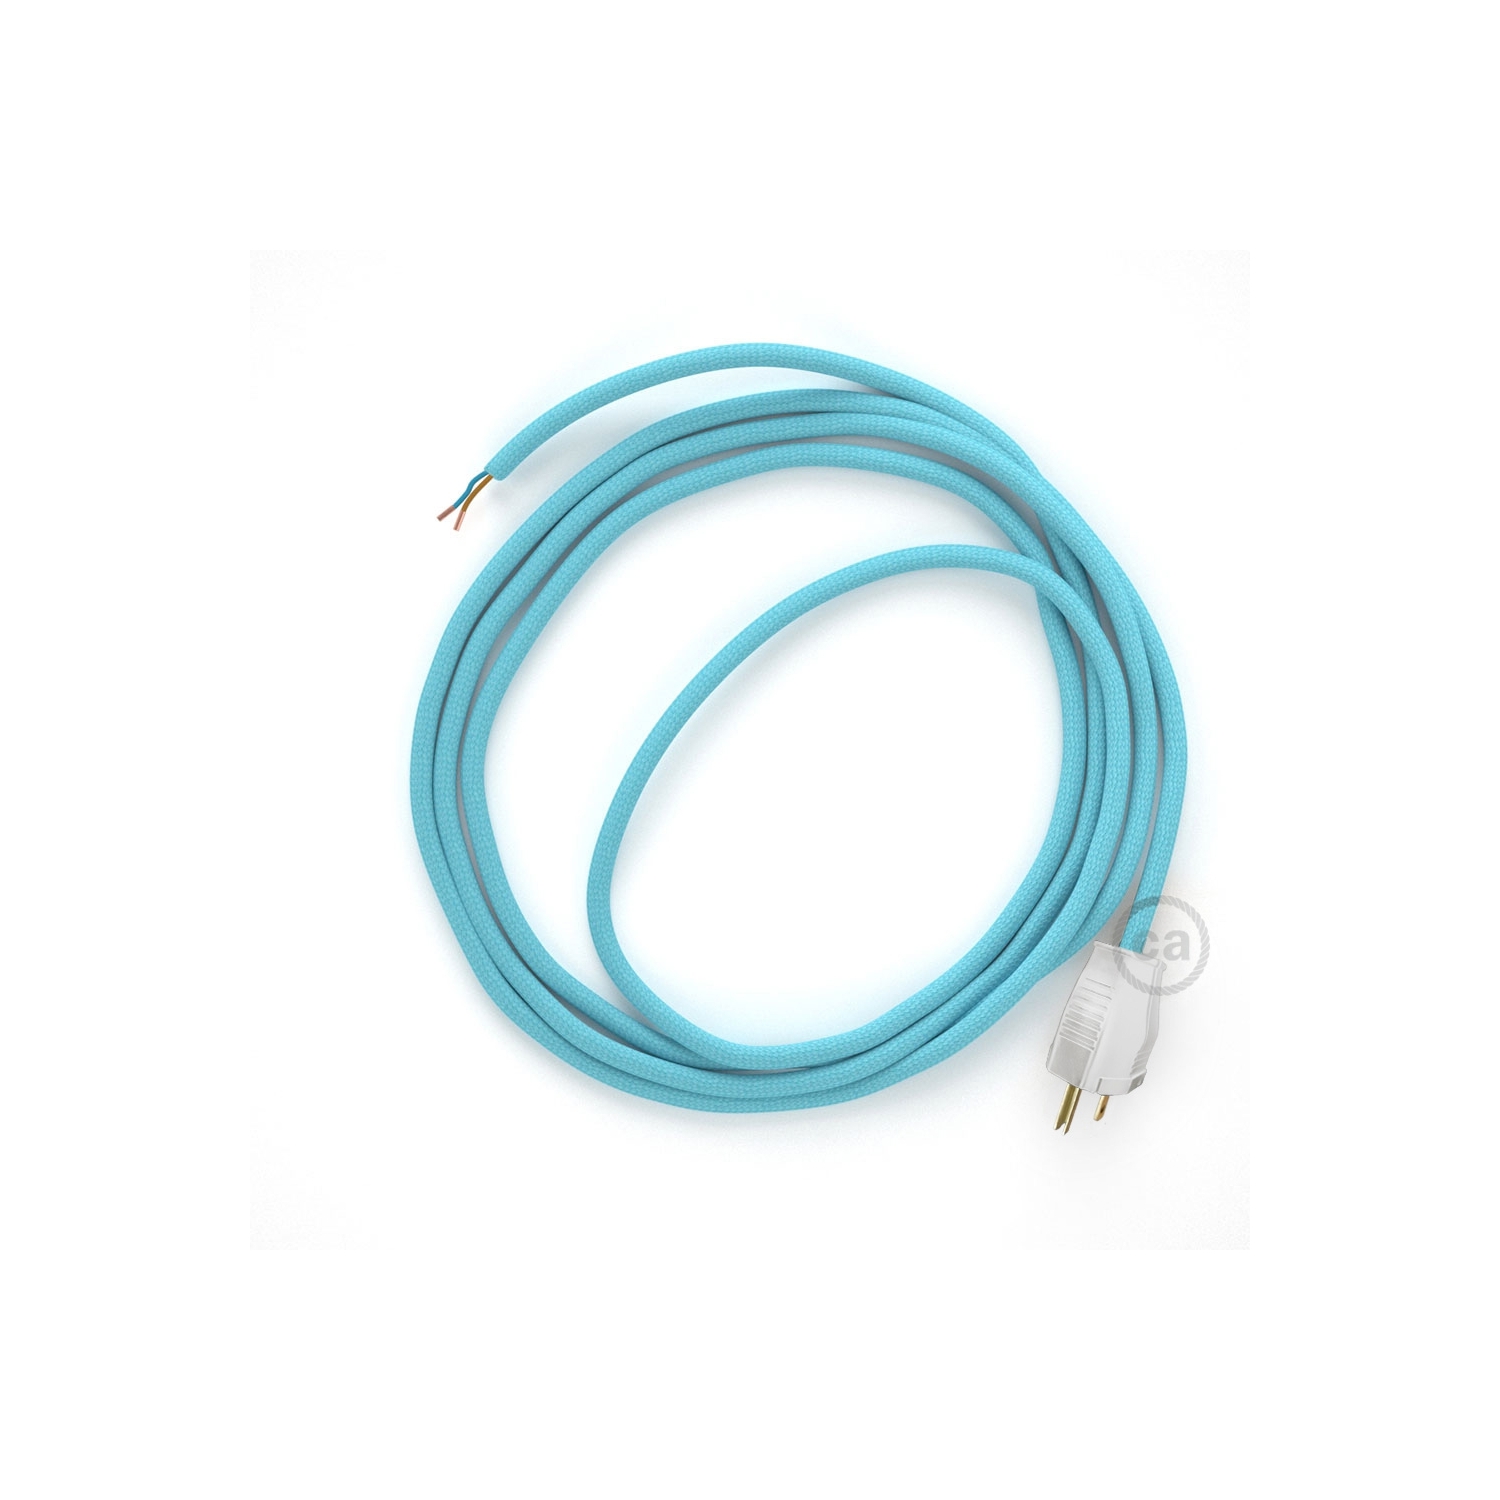 Cord-set - RM17 Baby Blue Rayon Covered Round Cable